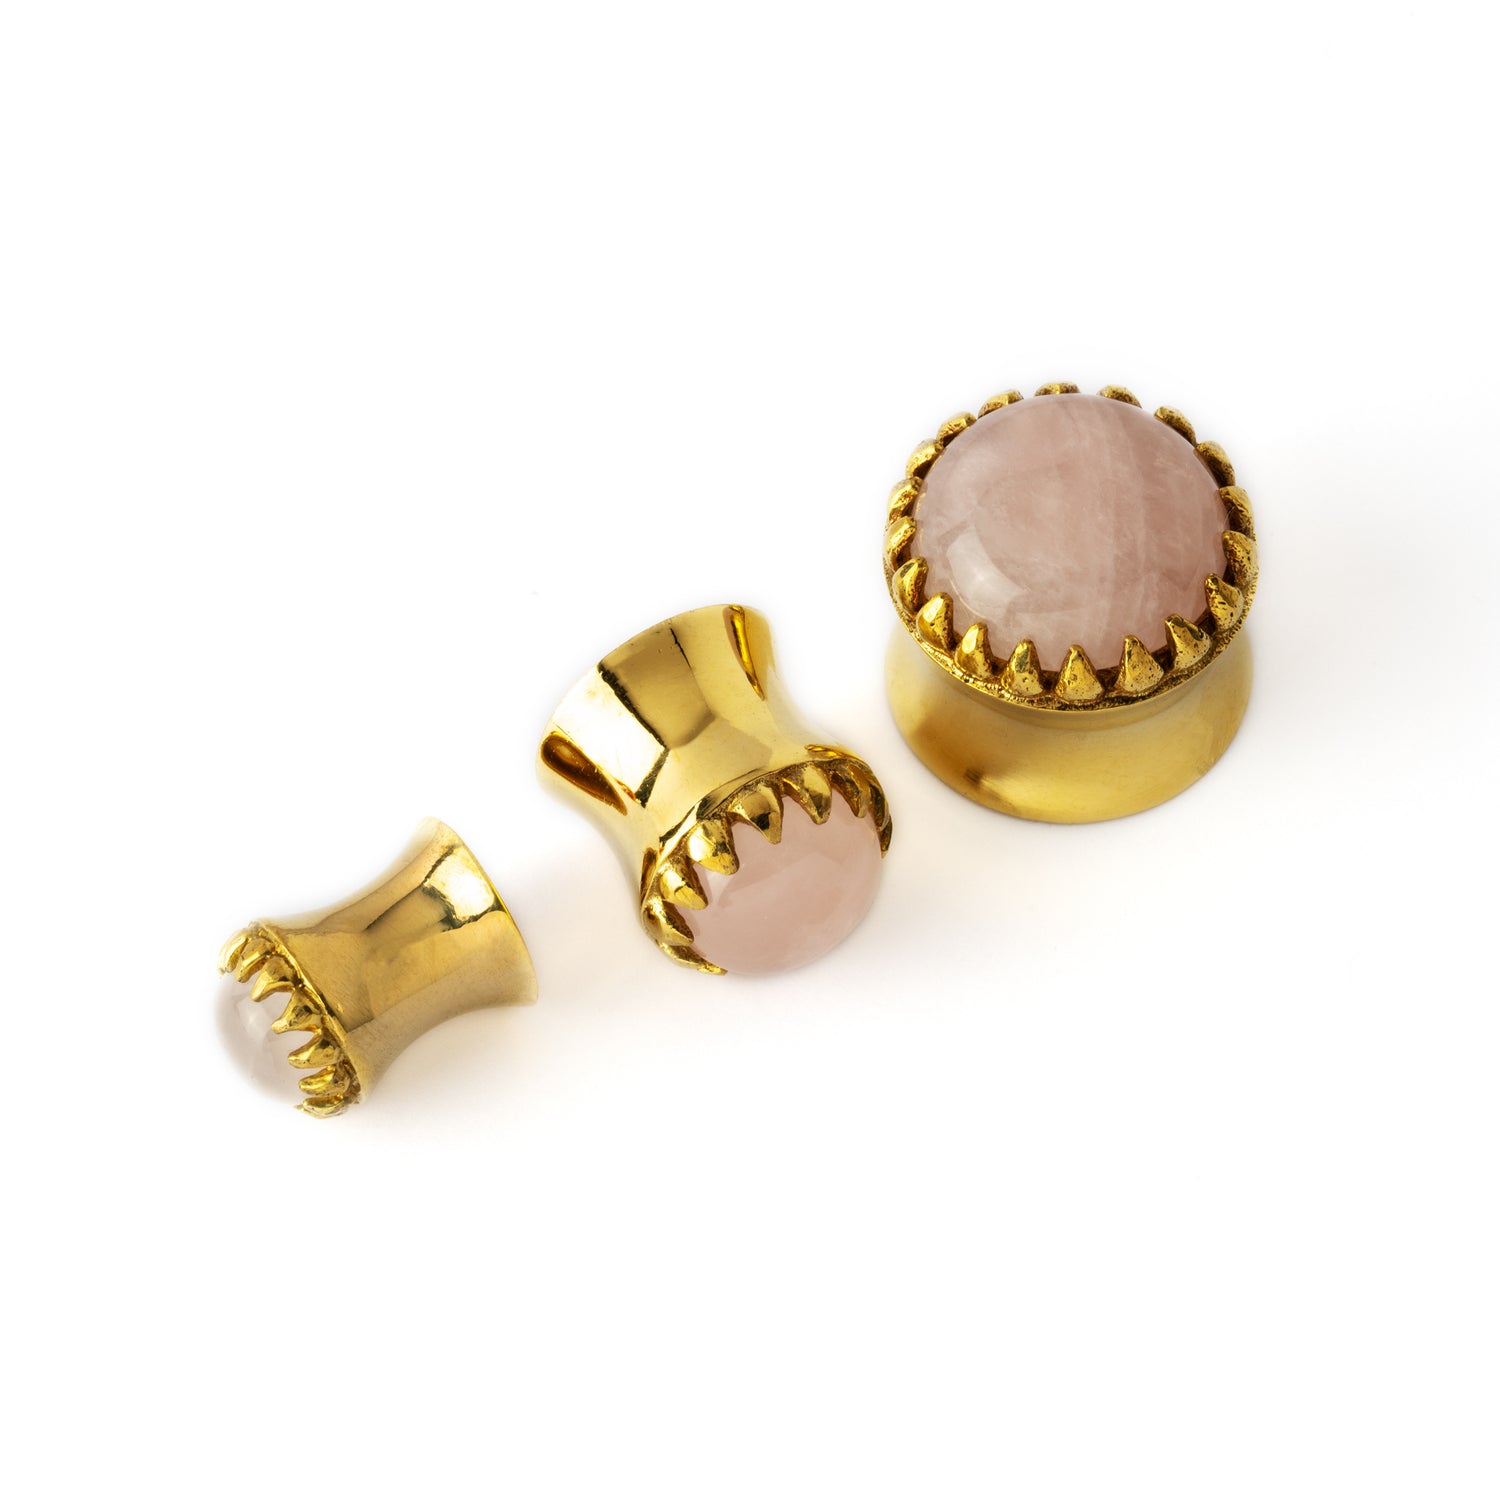 golden ear plugs crown shaped with centred rose quartz in different angles